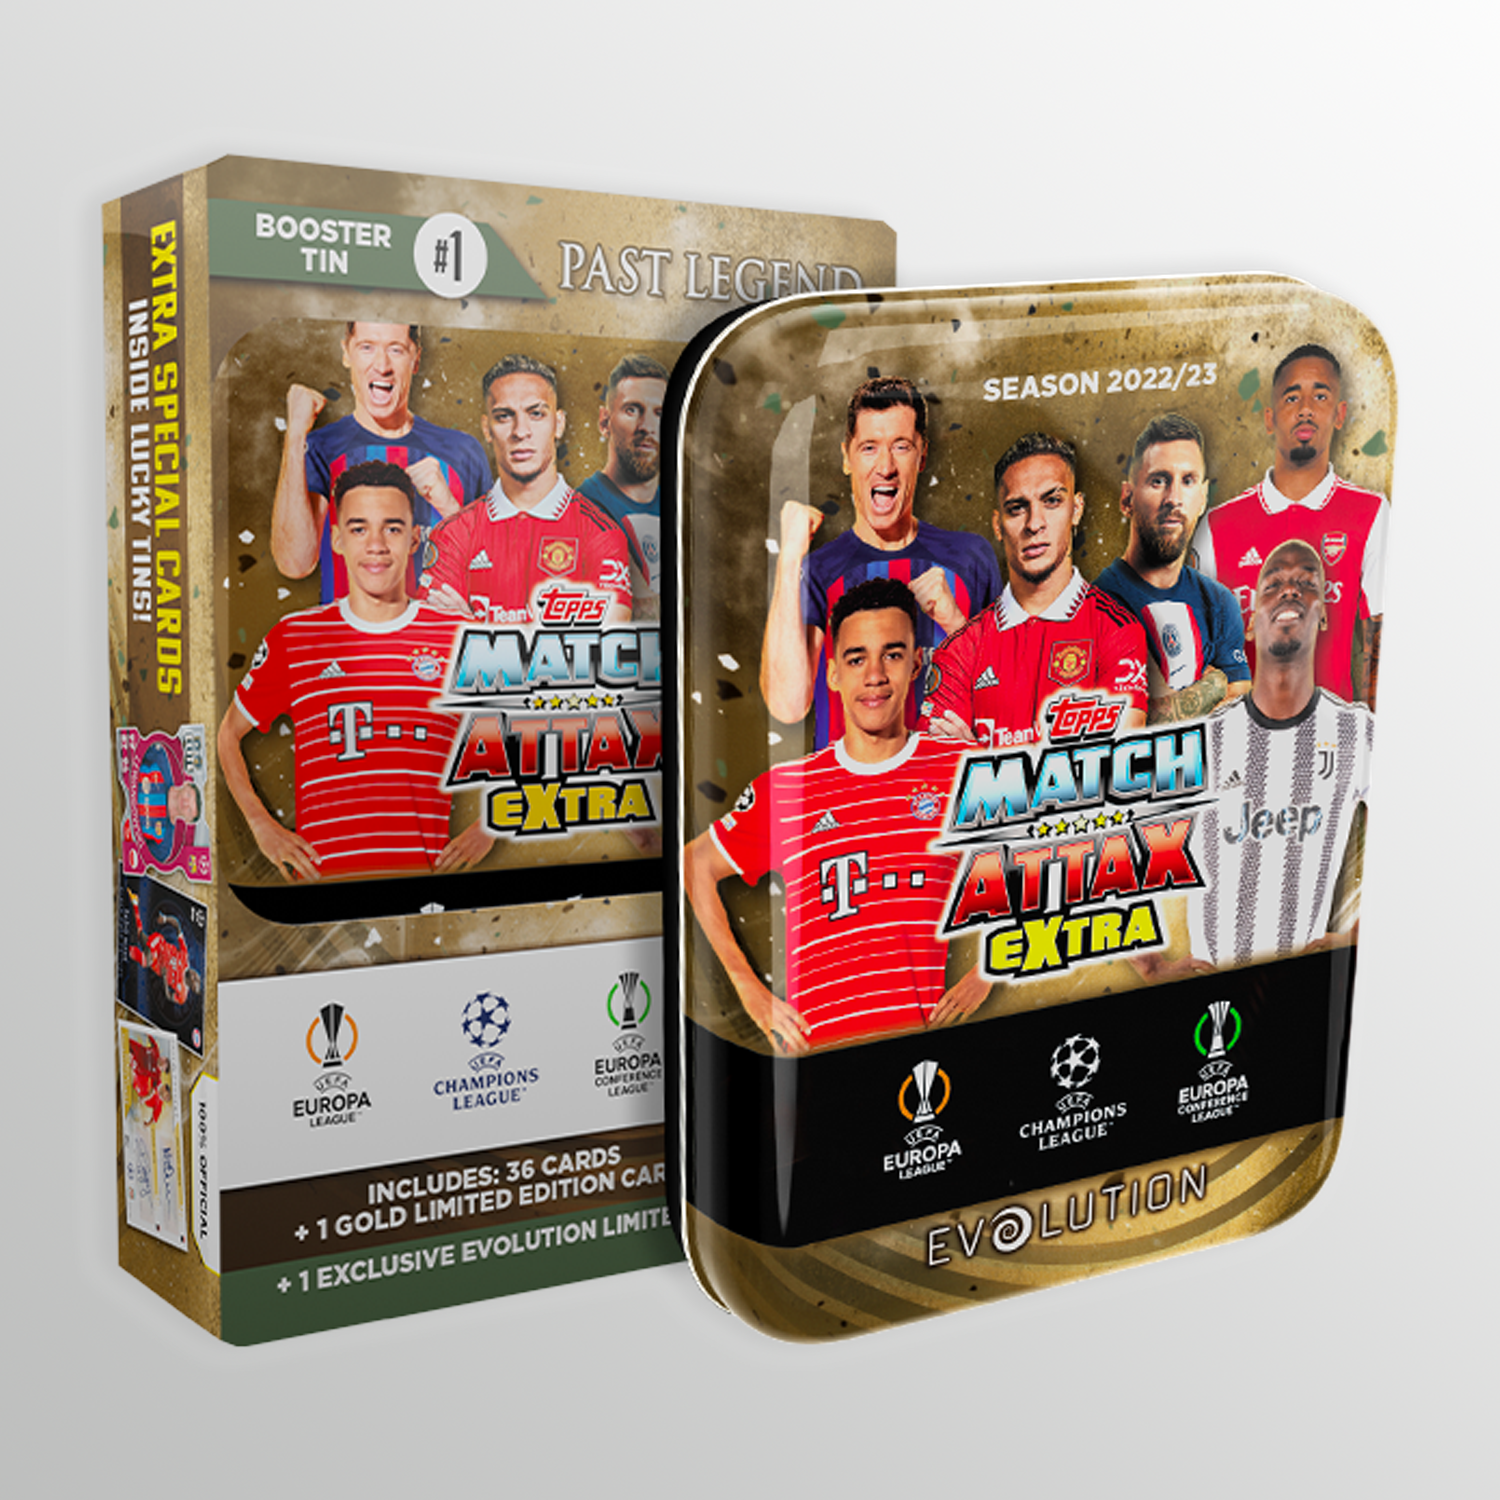 Match Attax Extra 2023 - Booster Tin - Past Legend UEFA Club Competitions Online Store